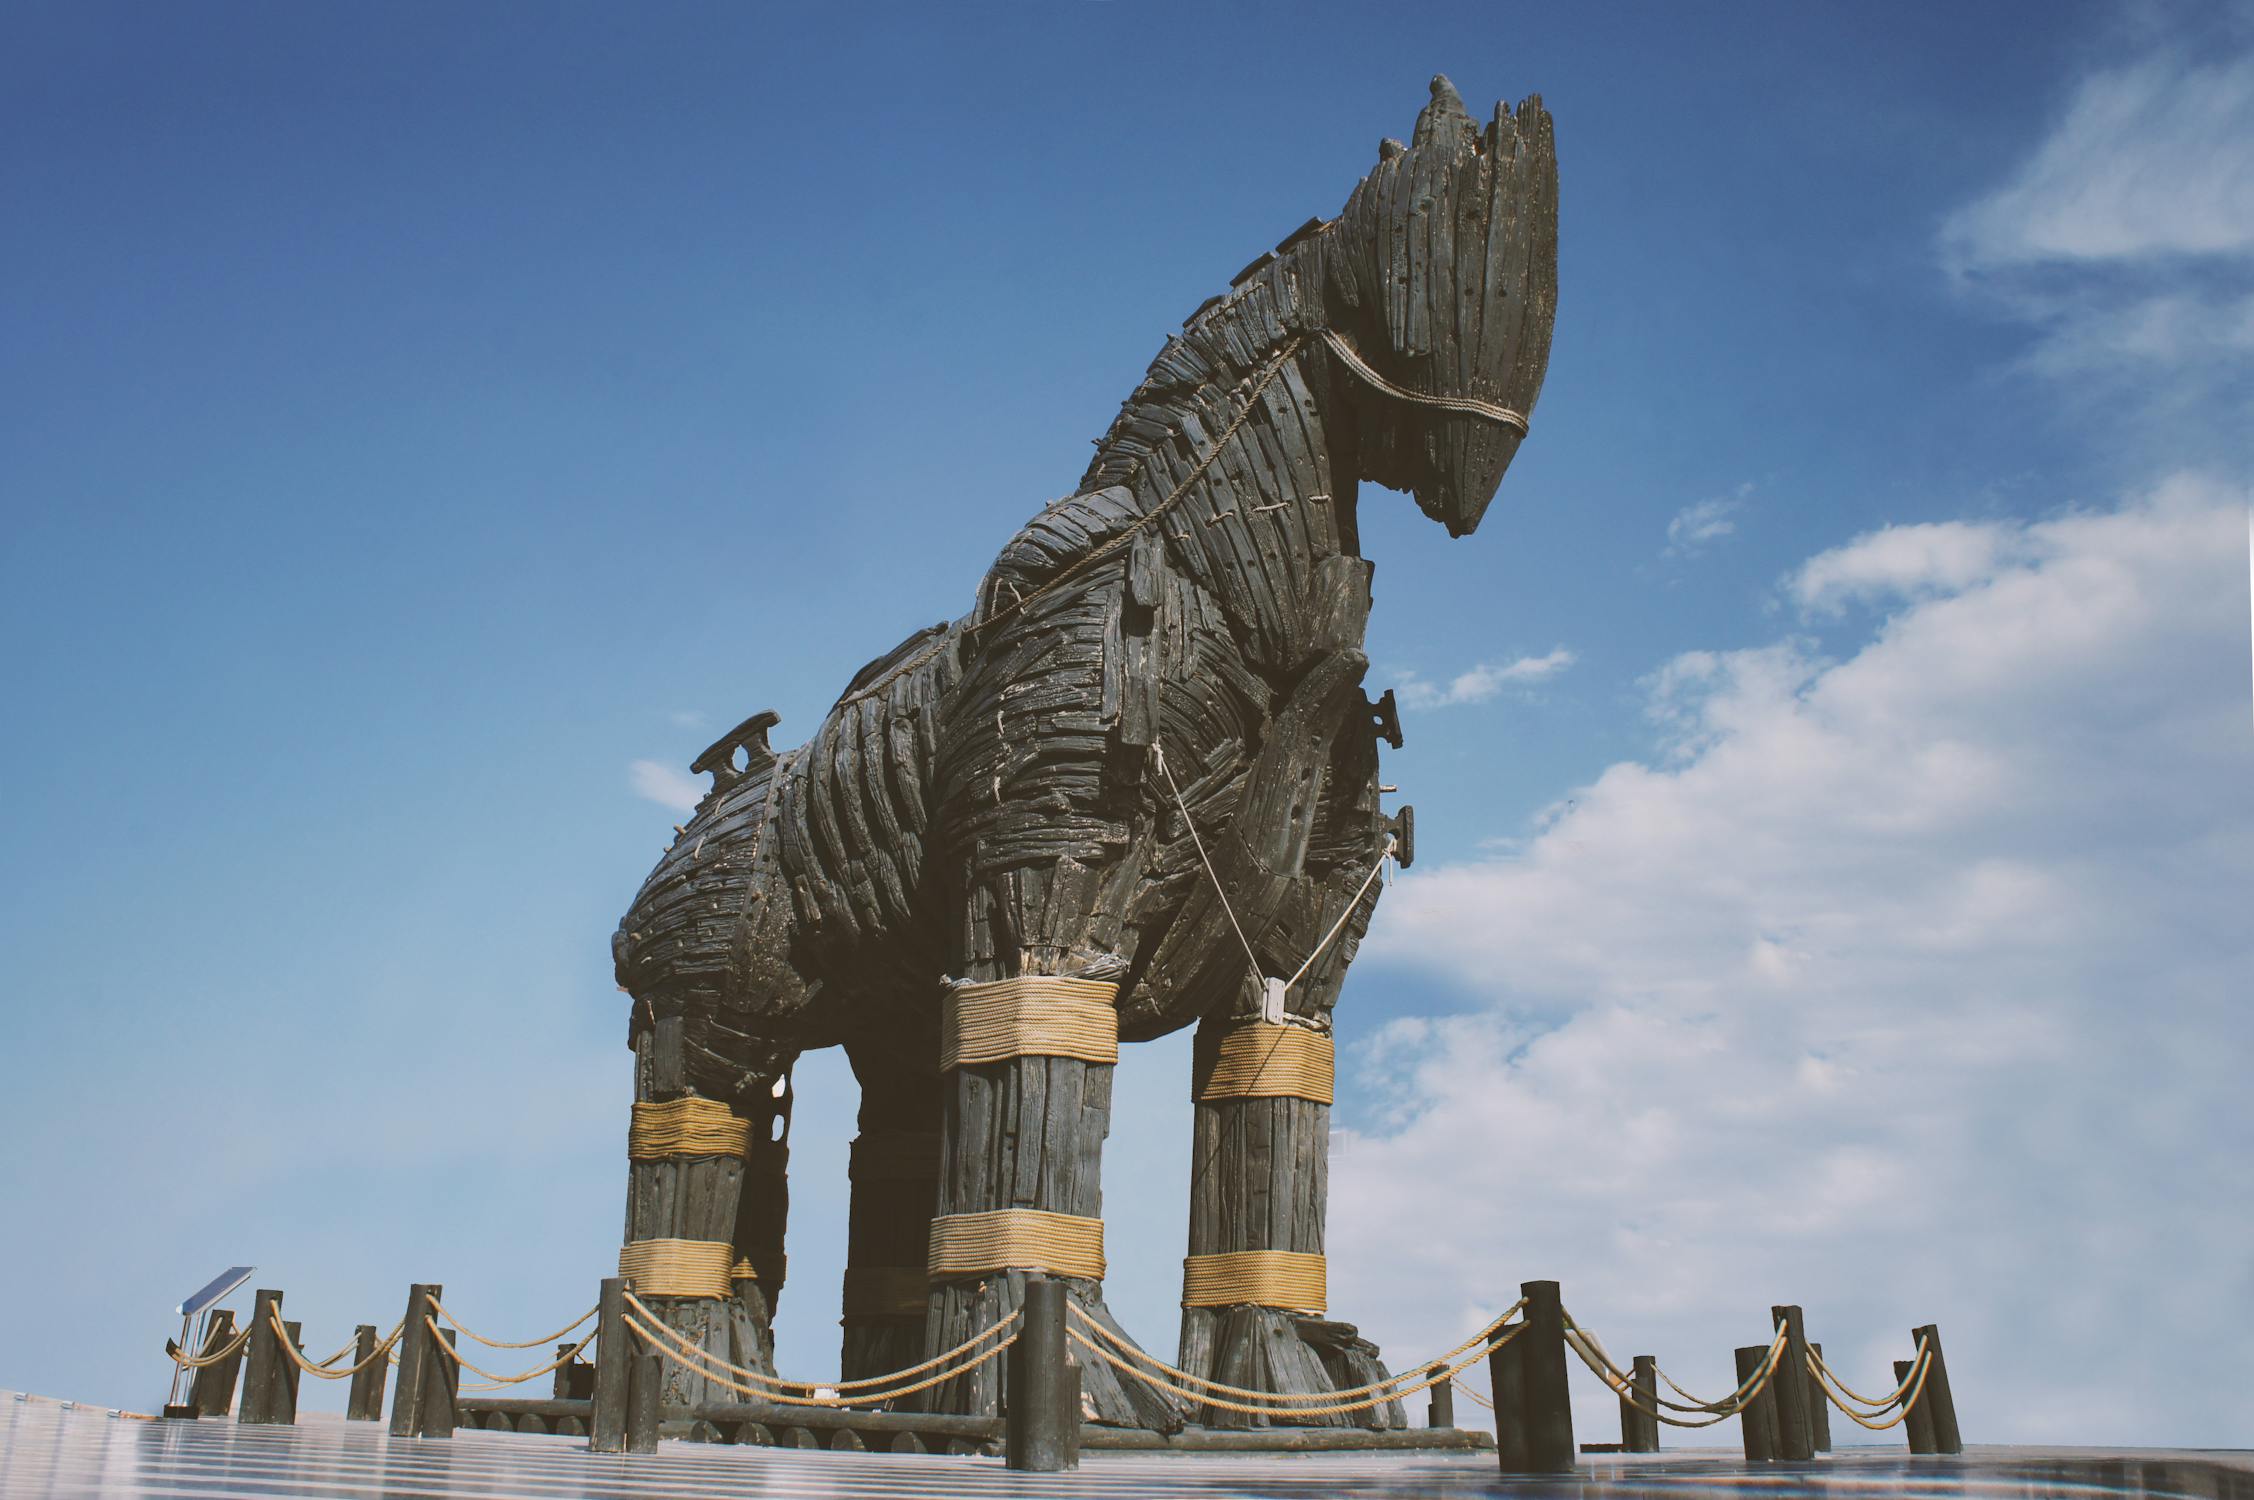 Trojan horse Photo by KEMAL HAYIT from Pexels: https://www.pexels.com/photo/the-trojan-horse-6474435/